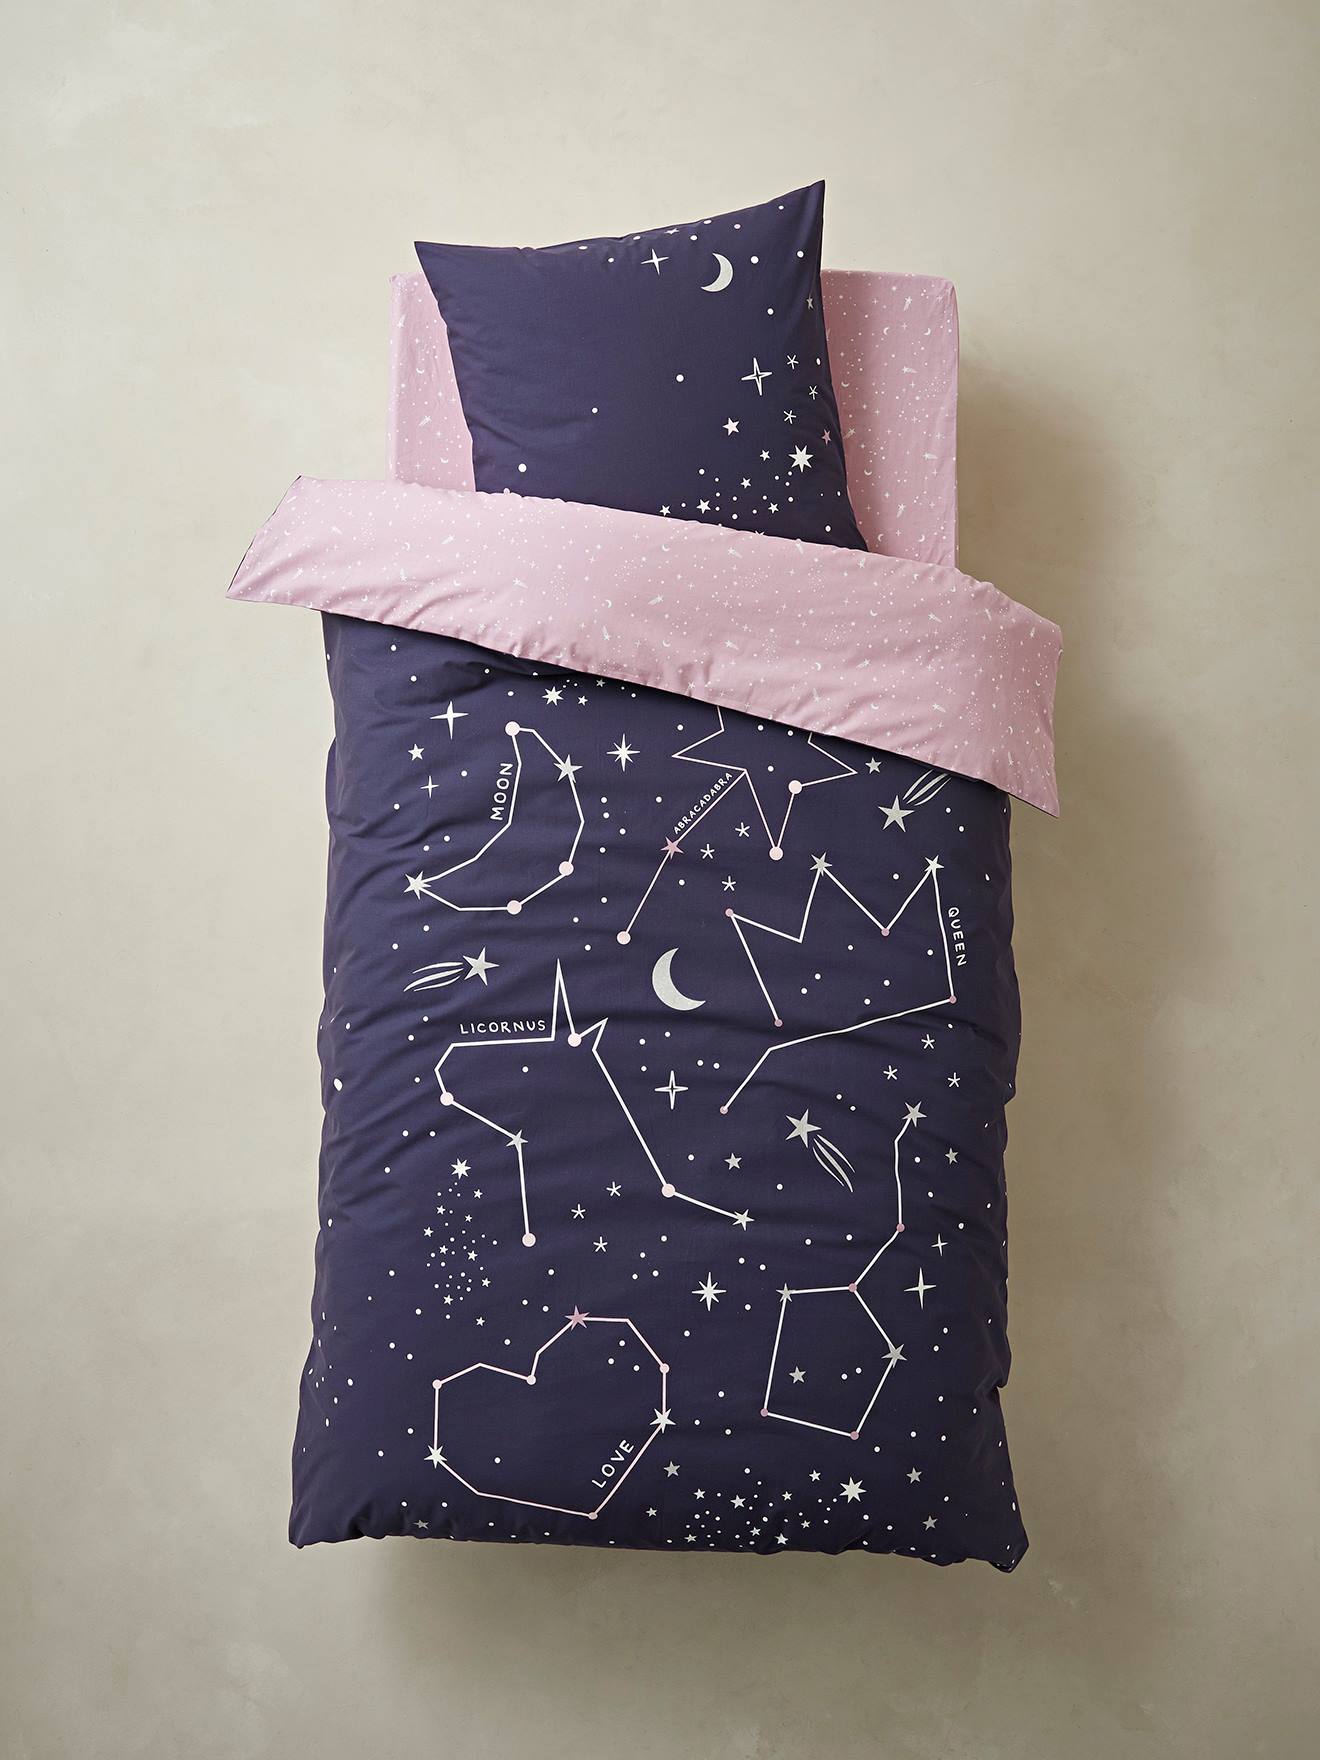 Unicorn Magical Stars Glow in the Dark Duvet Cover and Pillowcase Bedding Set 